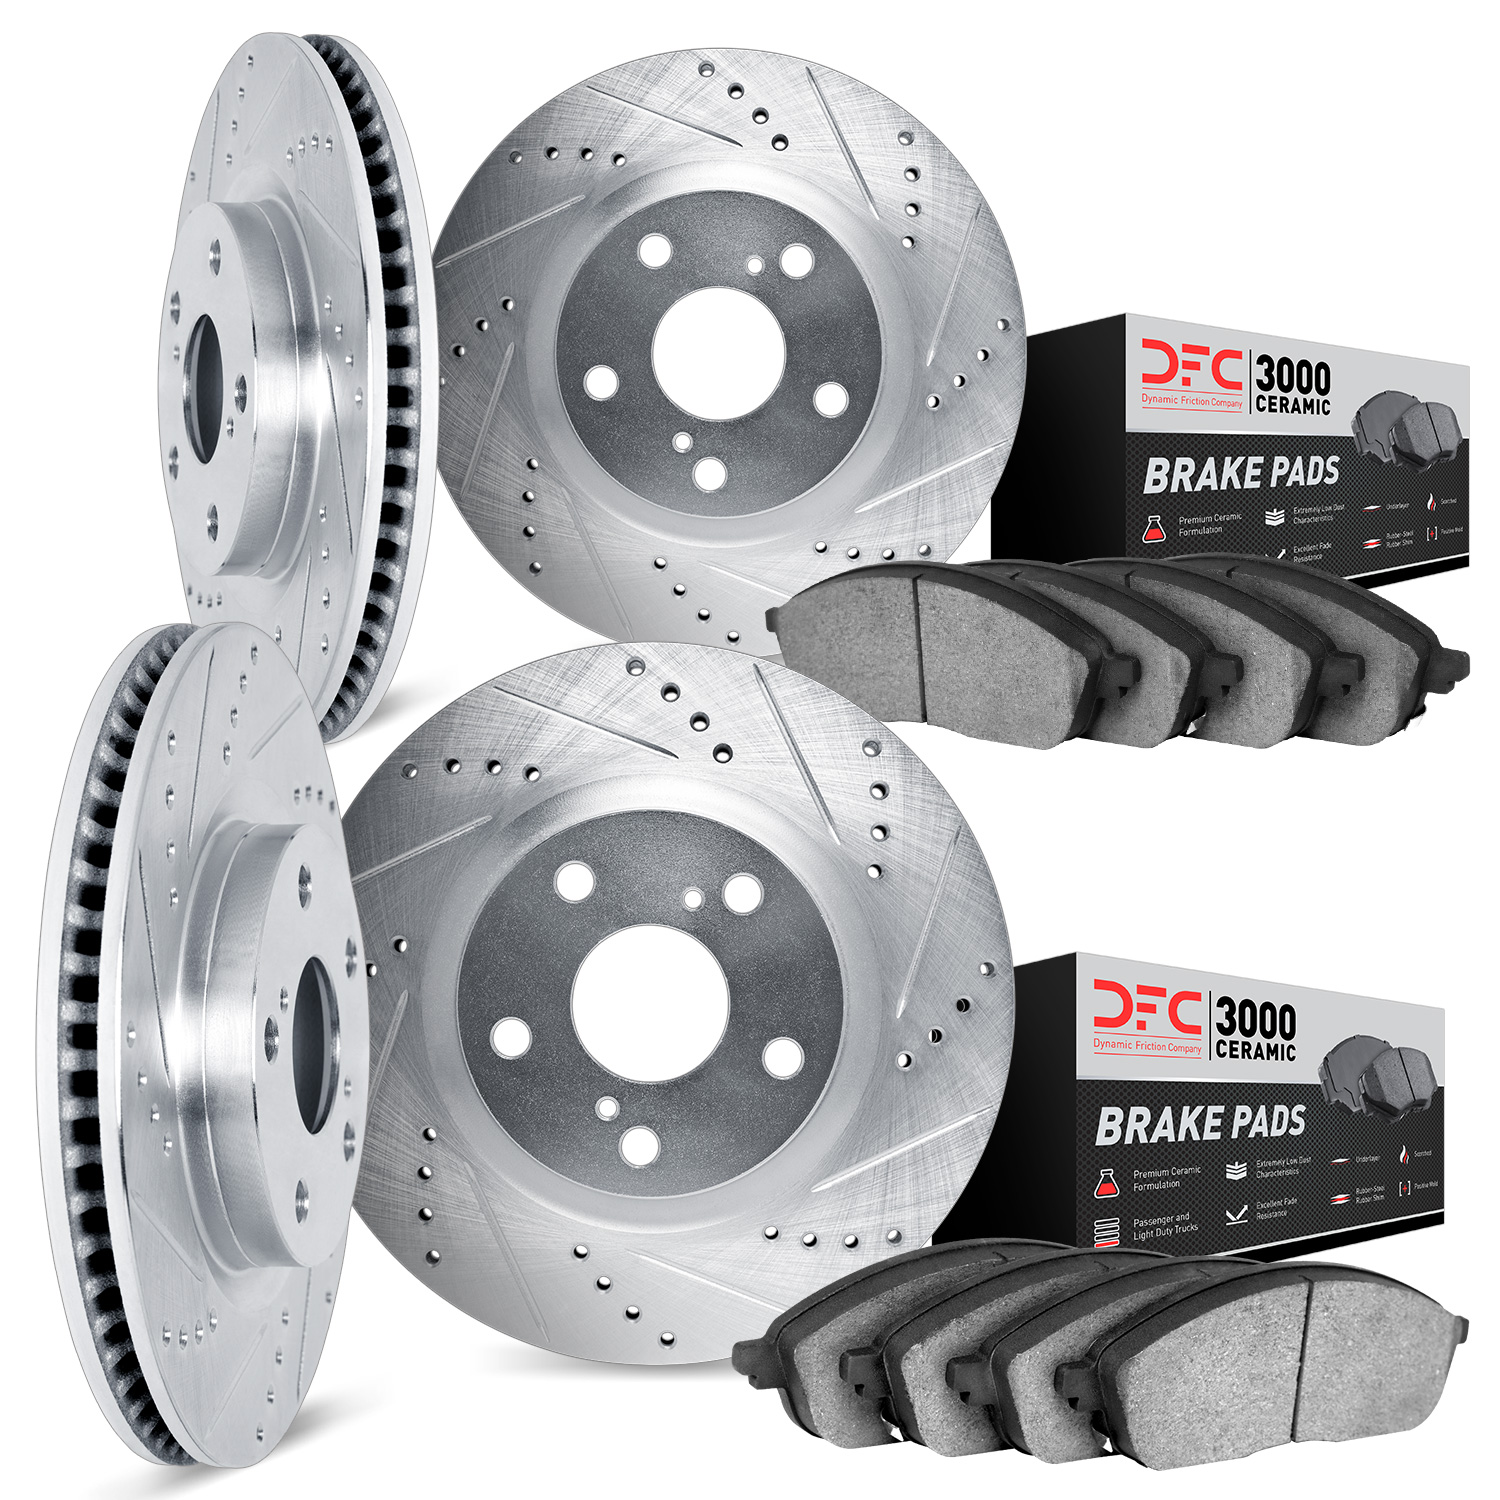 7304-75019 Drilled/Slotted Brake Rotor with 3000-Series Ceramic Brake Pads Kit [Silver], 2014-2015 Lexus/Toyota/Scion, Position: